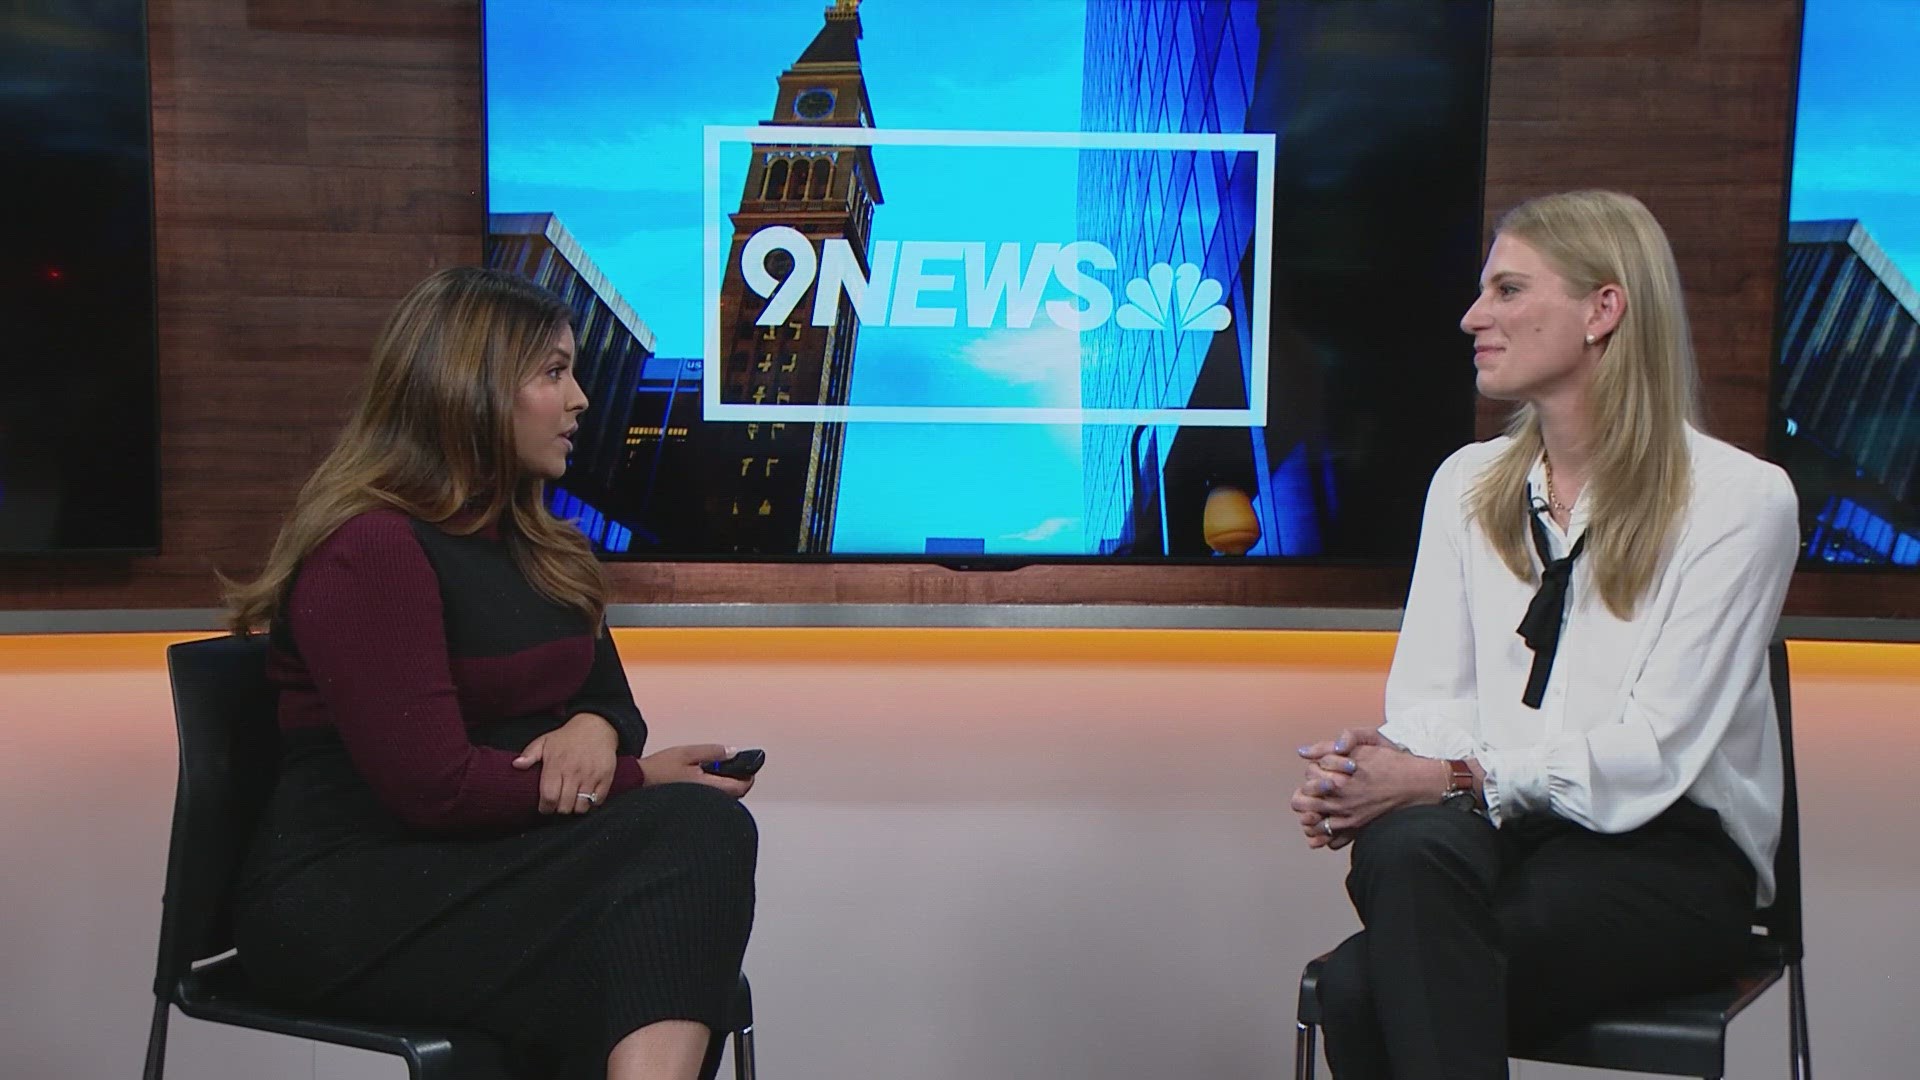 Dr. Jill Liss with UCHealth Cherry Creek Medical Center joins us for a conversation on navigating menopause.